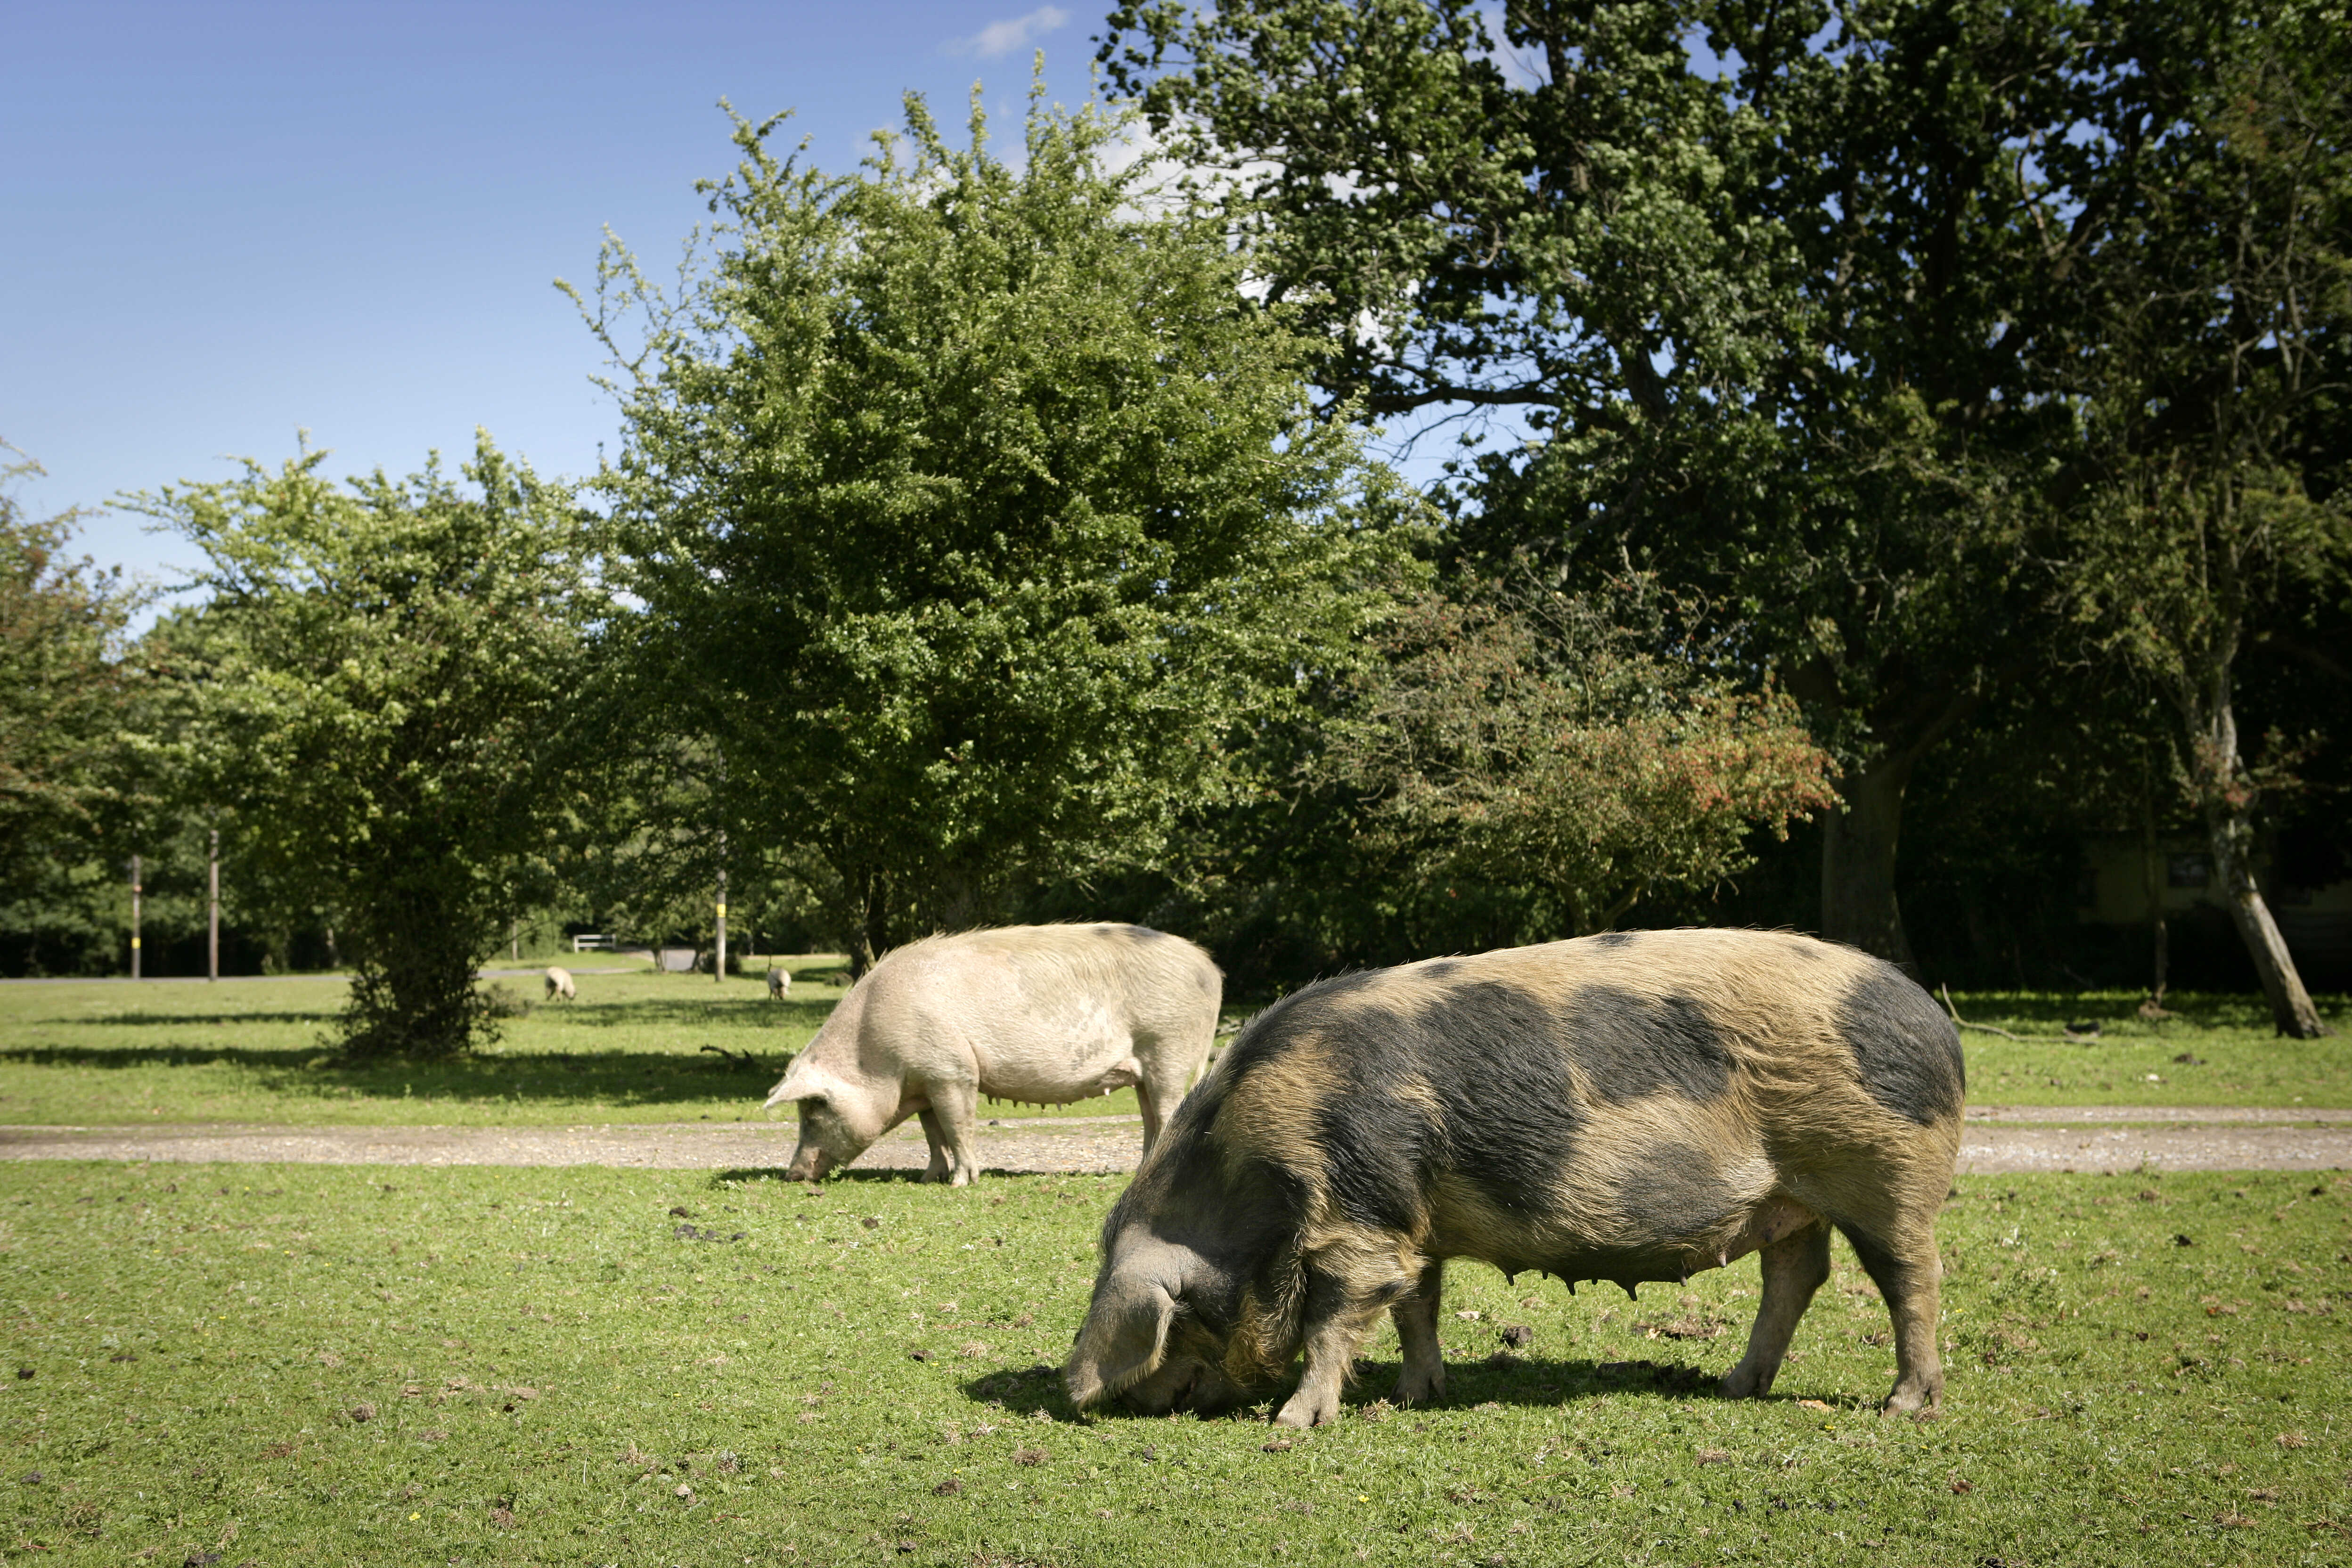 Pigs in New Forest